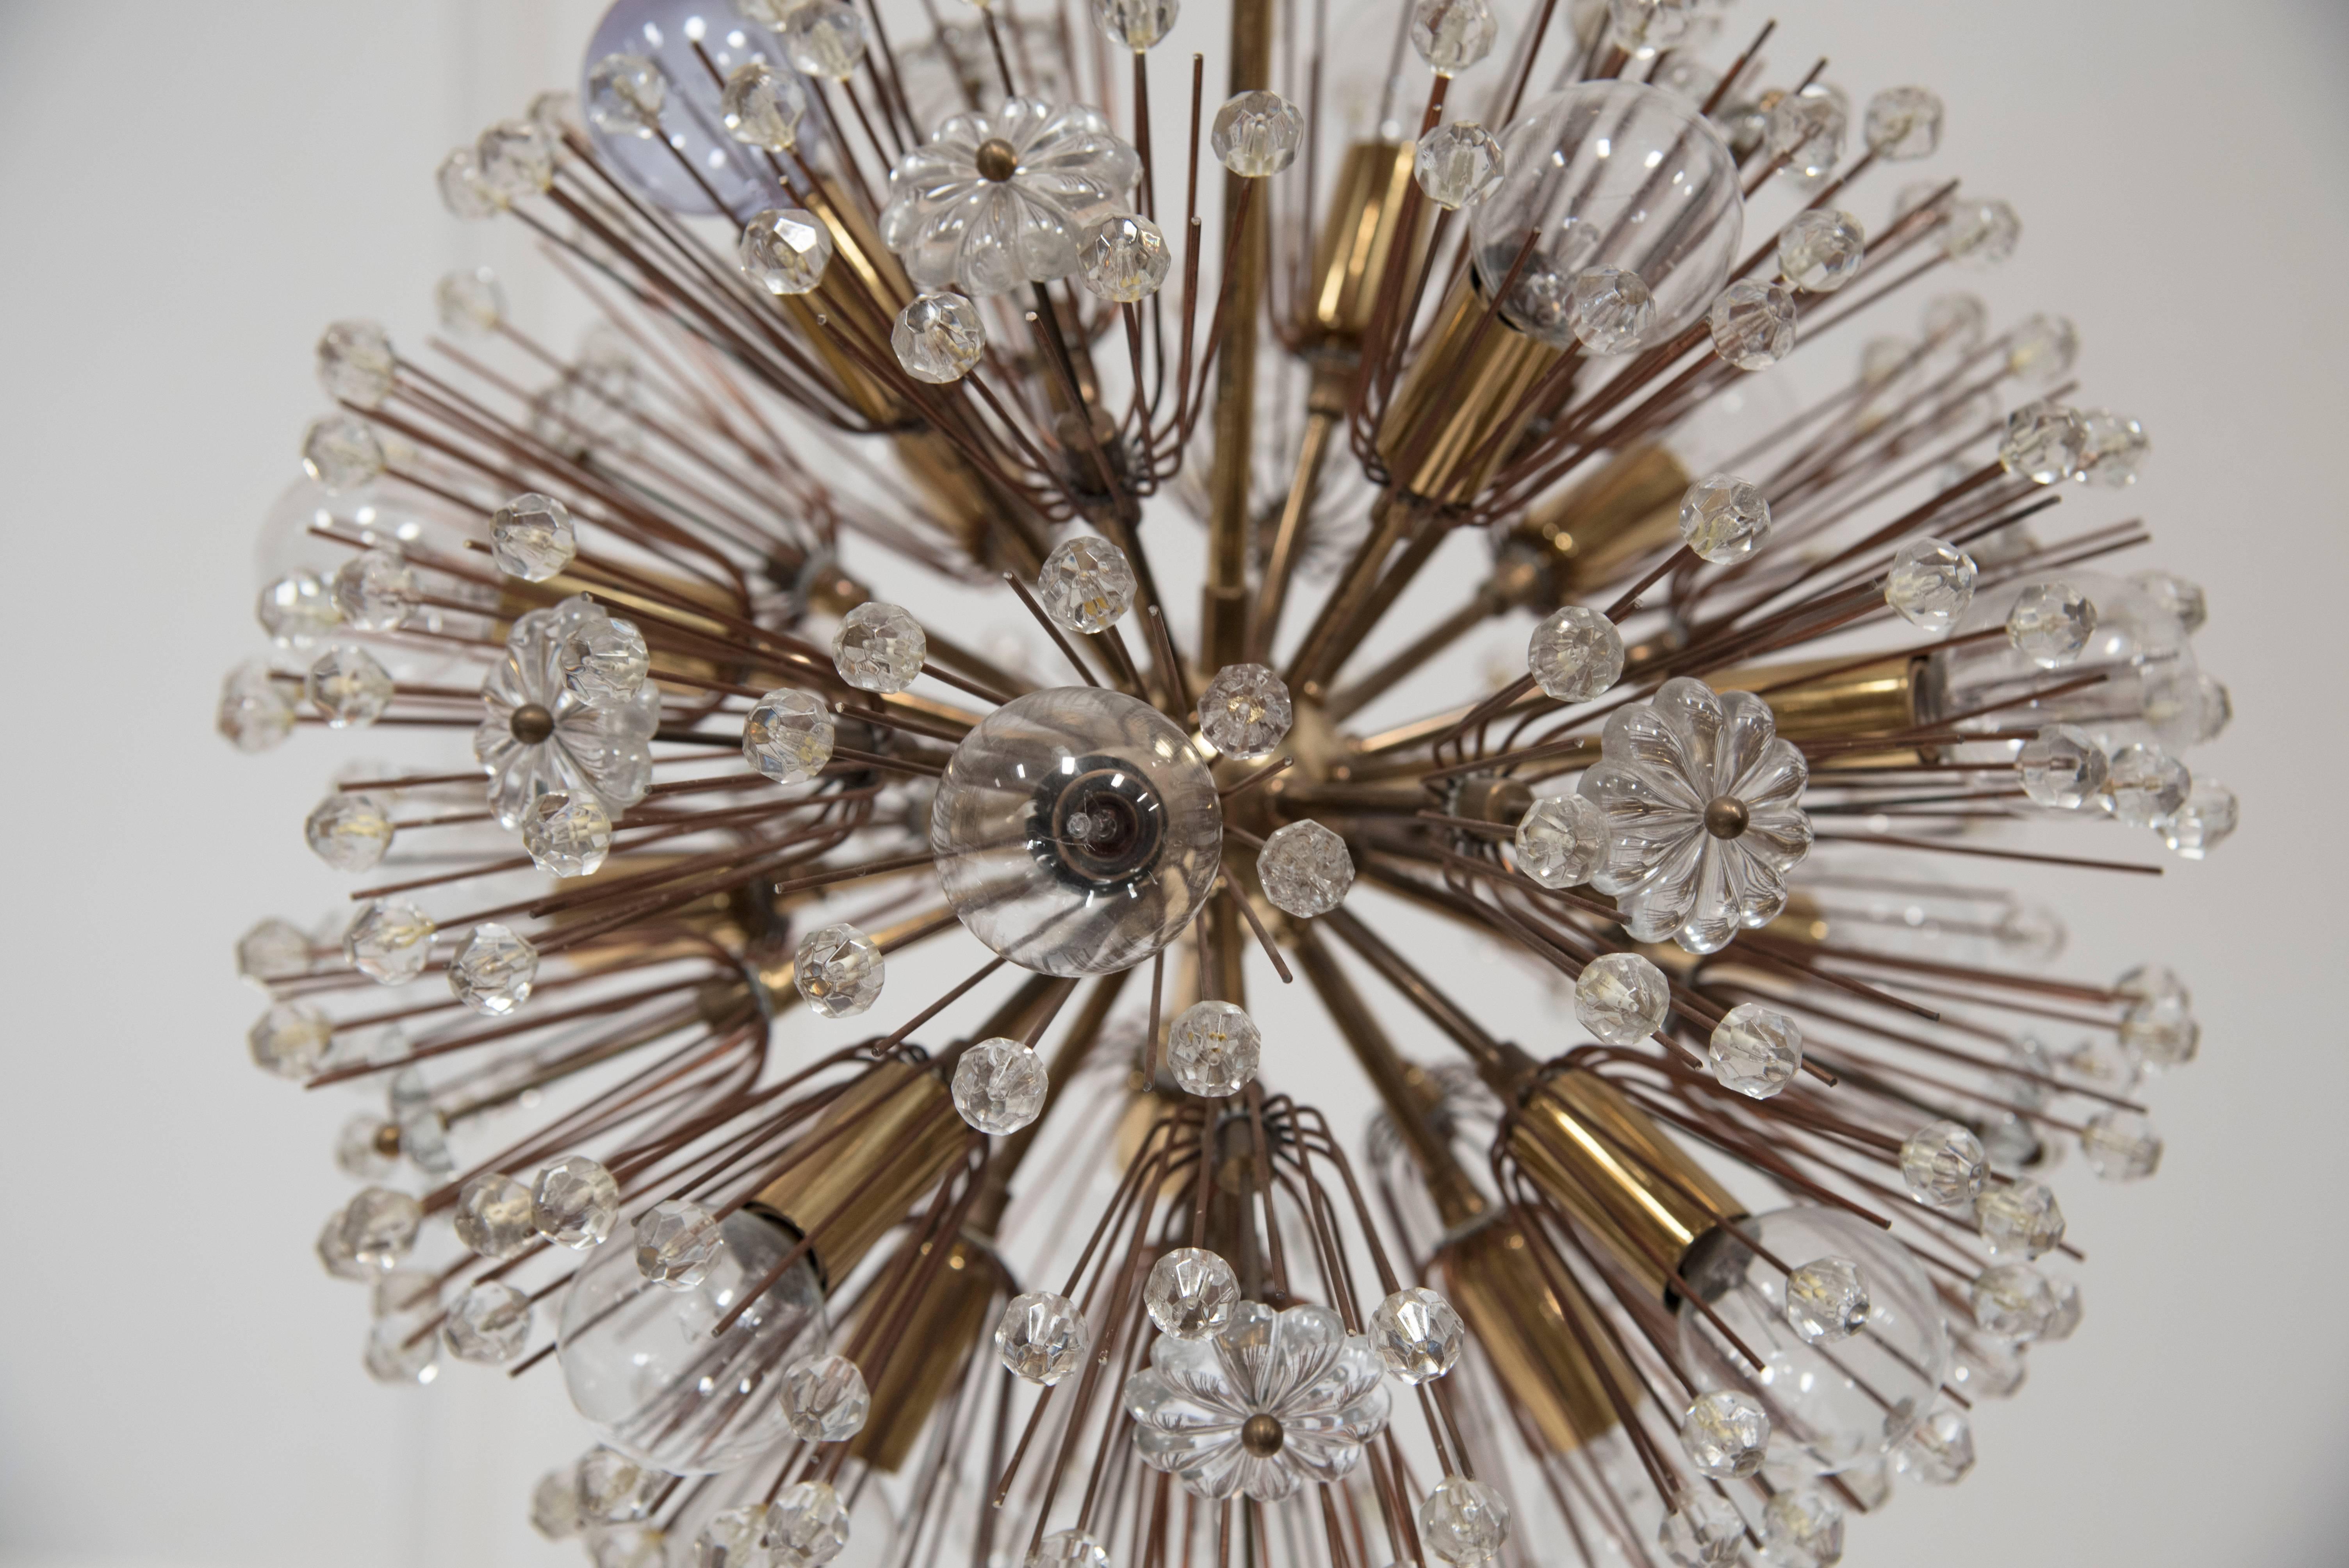 A radiating Austrian crystal starburst form eighteen-light chandelier. The circular forms emanate from brass adorned with faceted crystal beads and stars achieving an explosion of light. J L Lobmeyer designed the chandelier for the Metropolitan